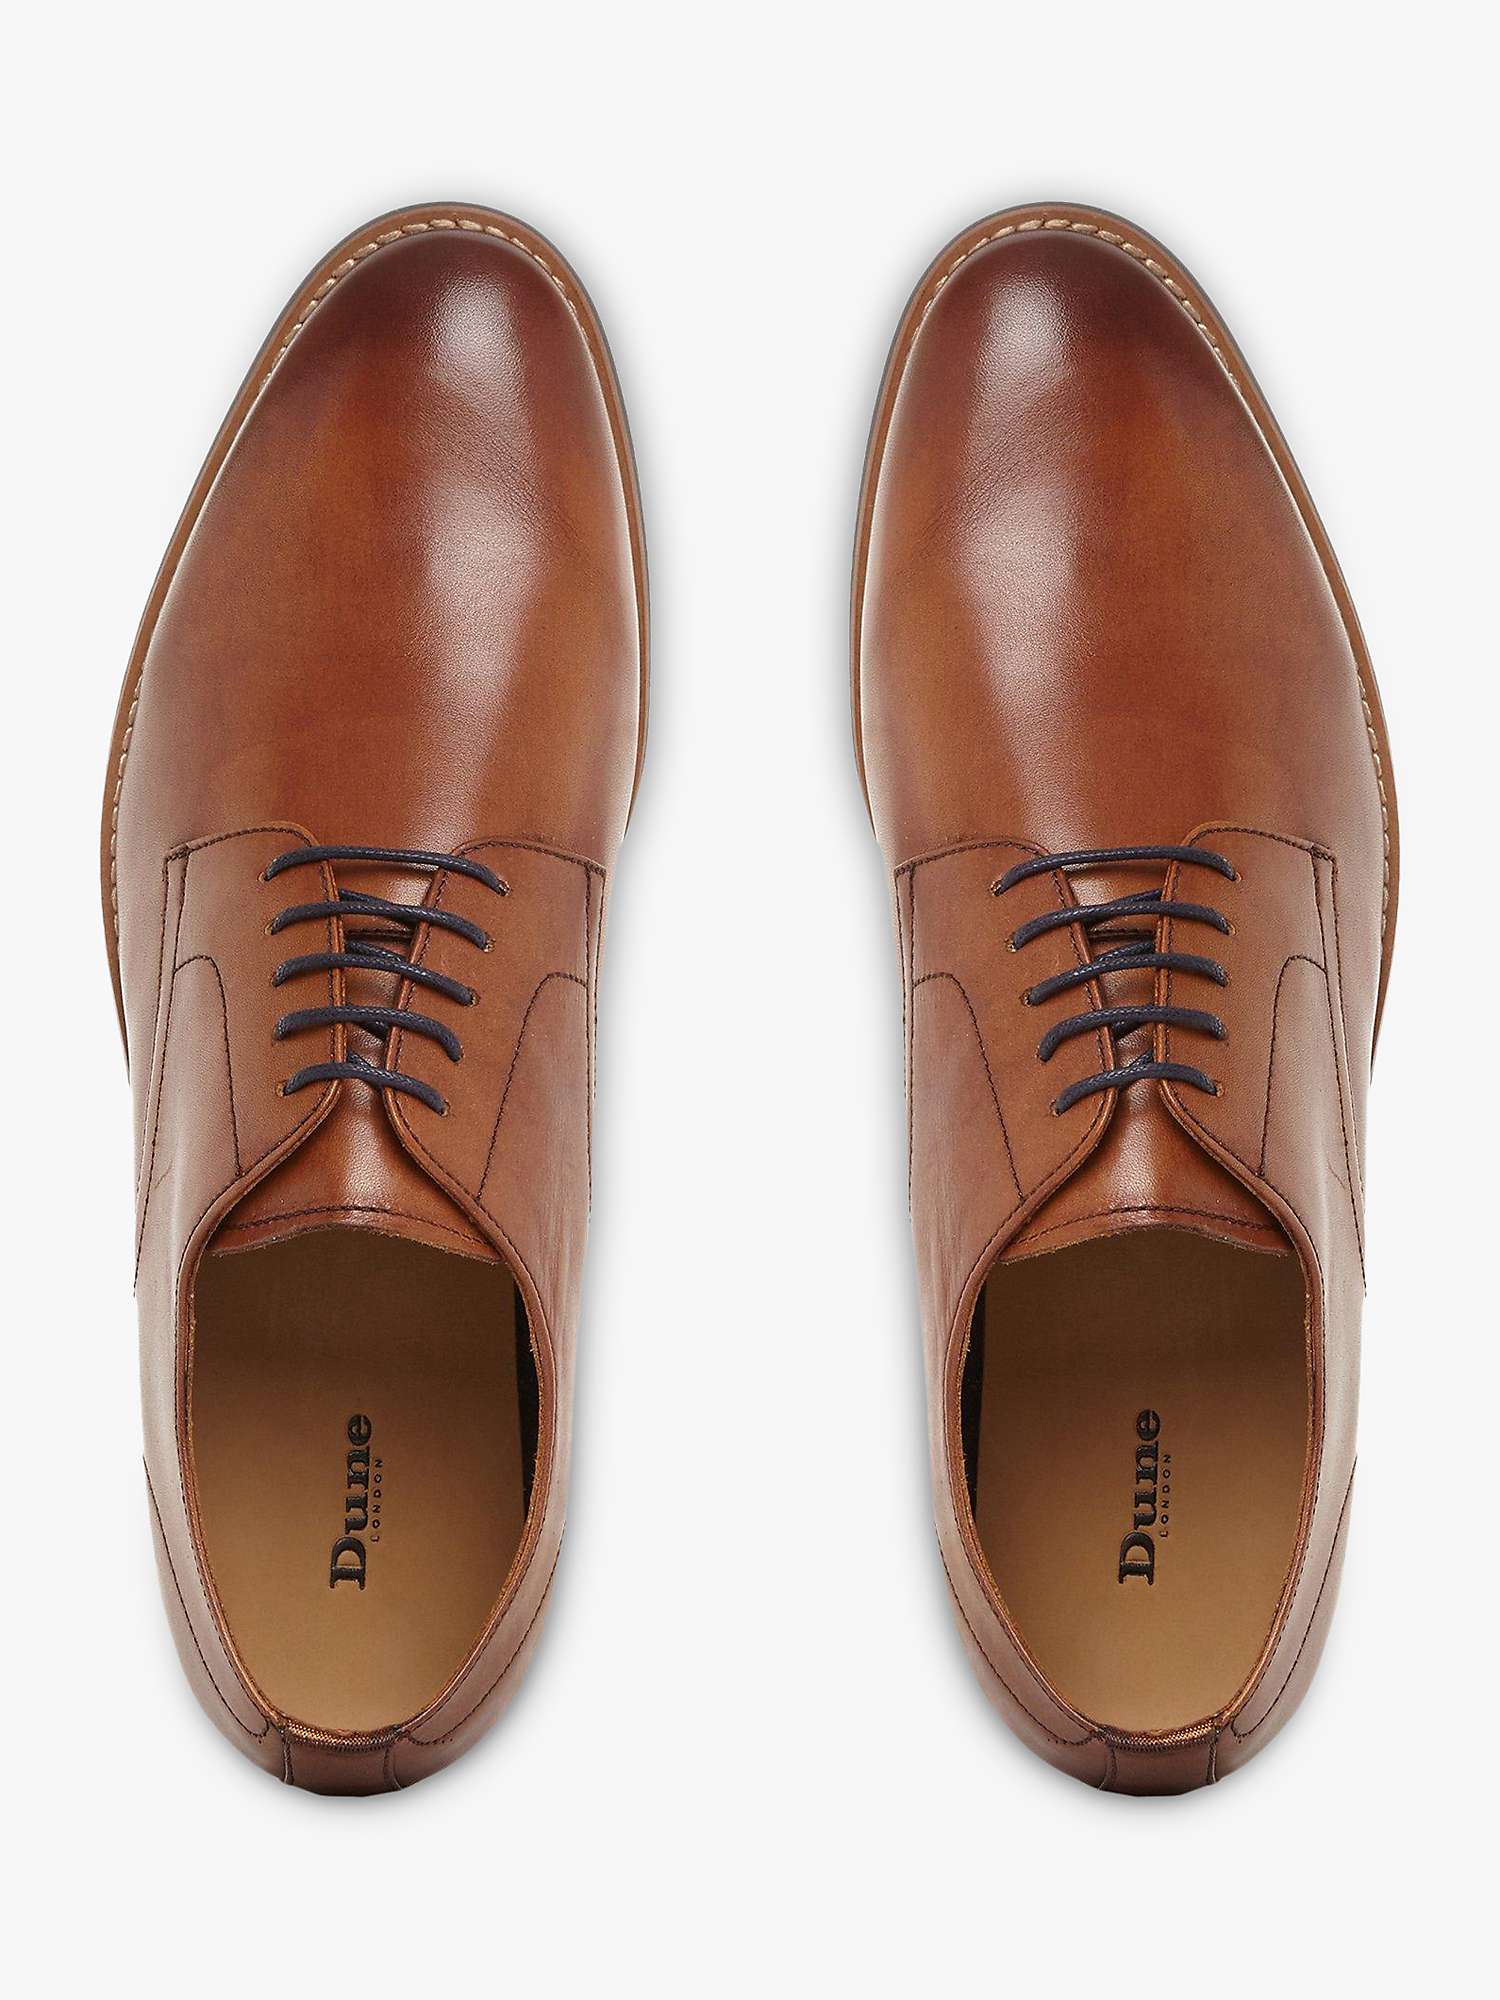 Buy Dune Suffolks Leather Gibson Shoes Online at johnlewis.com